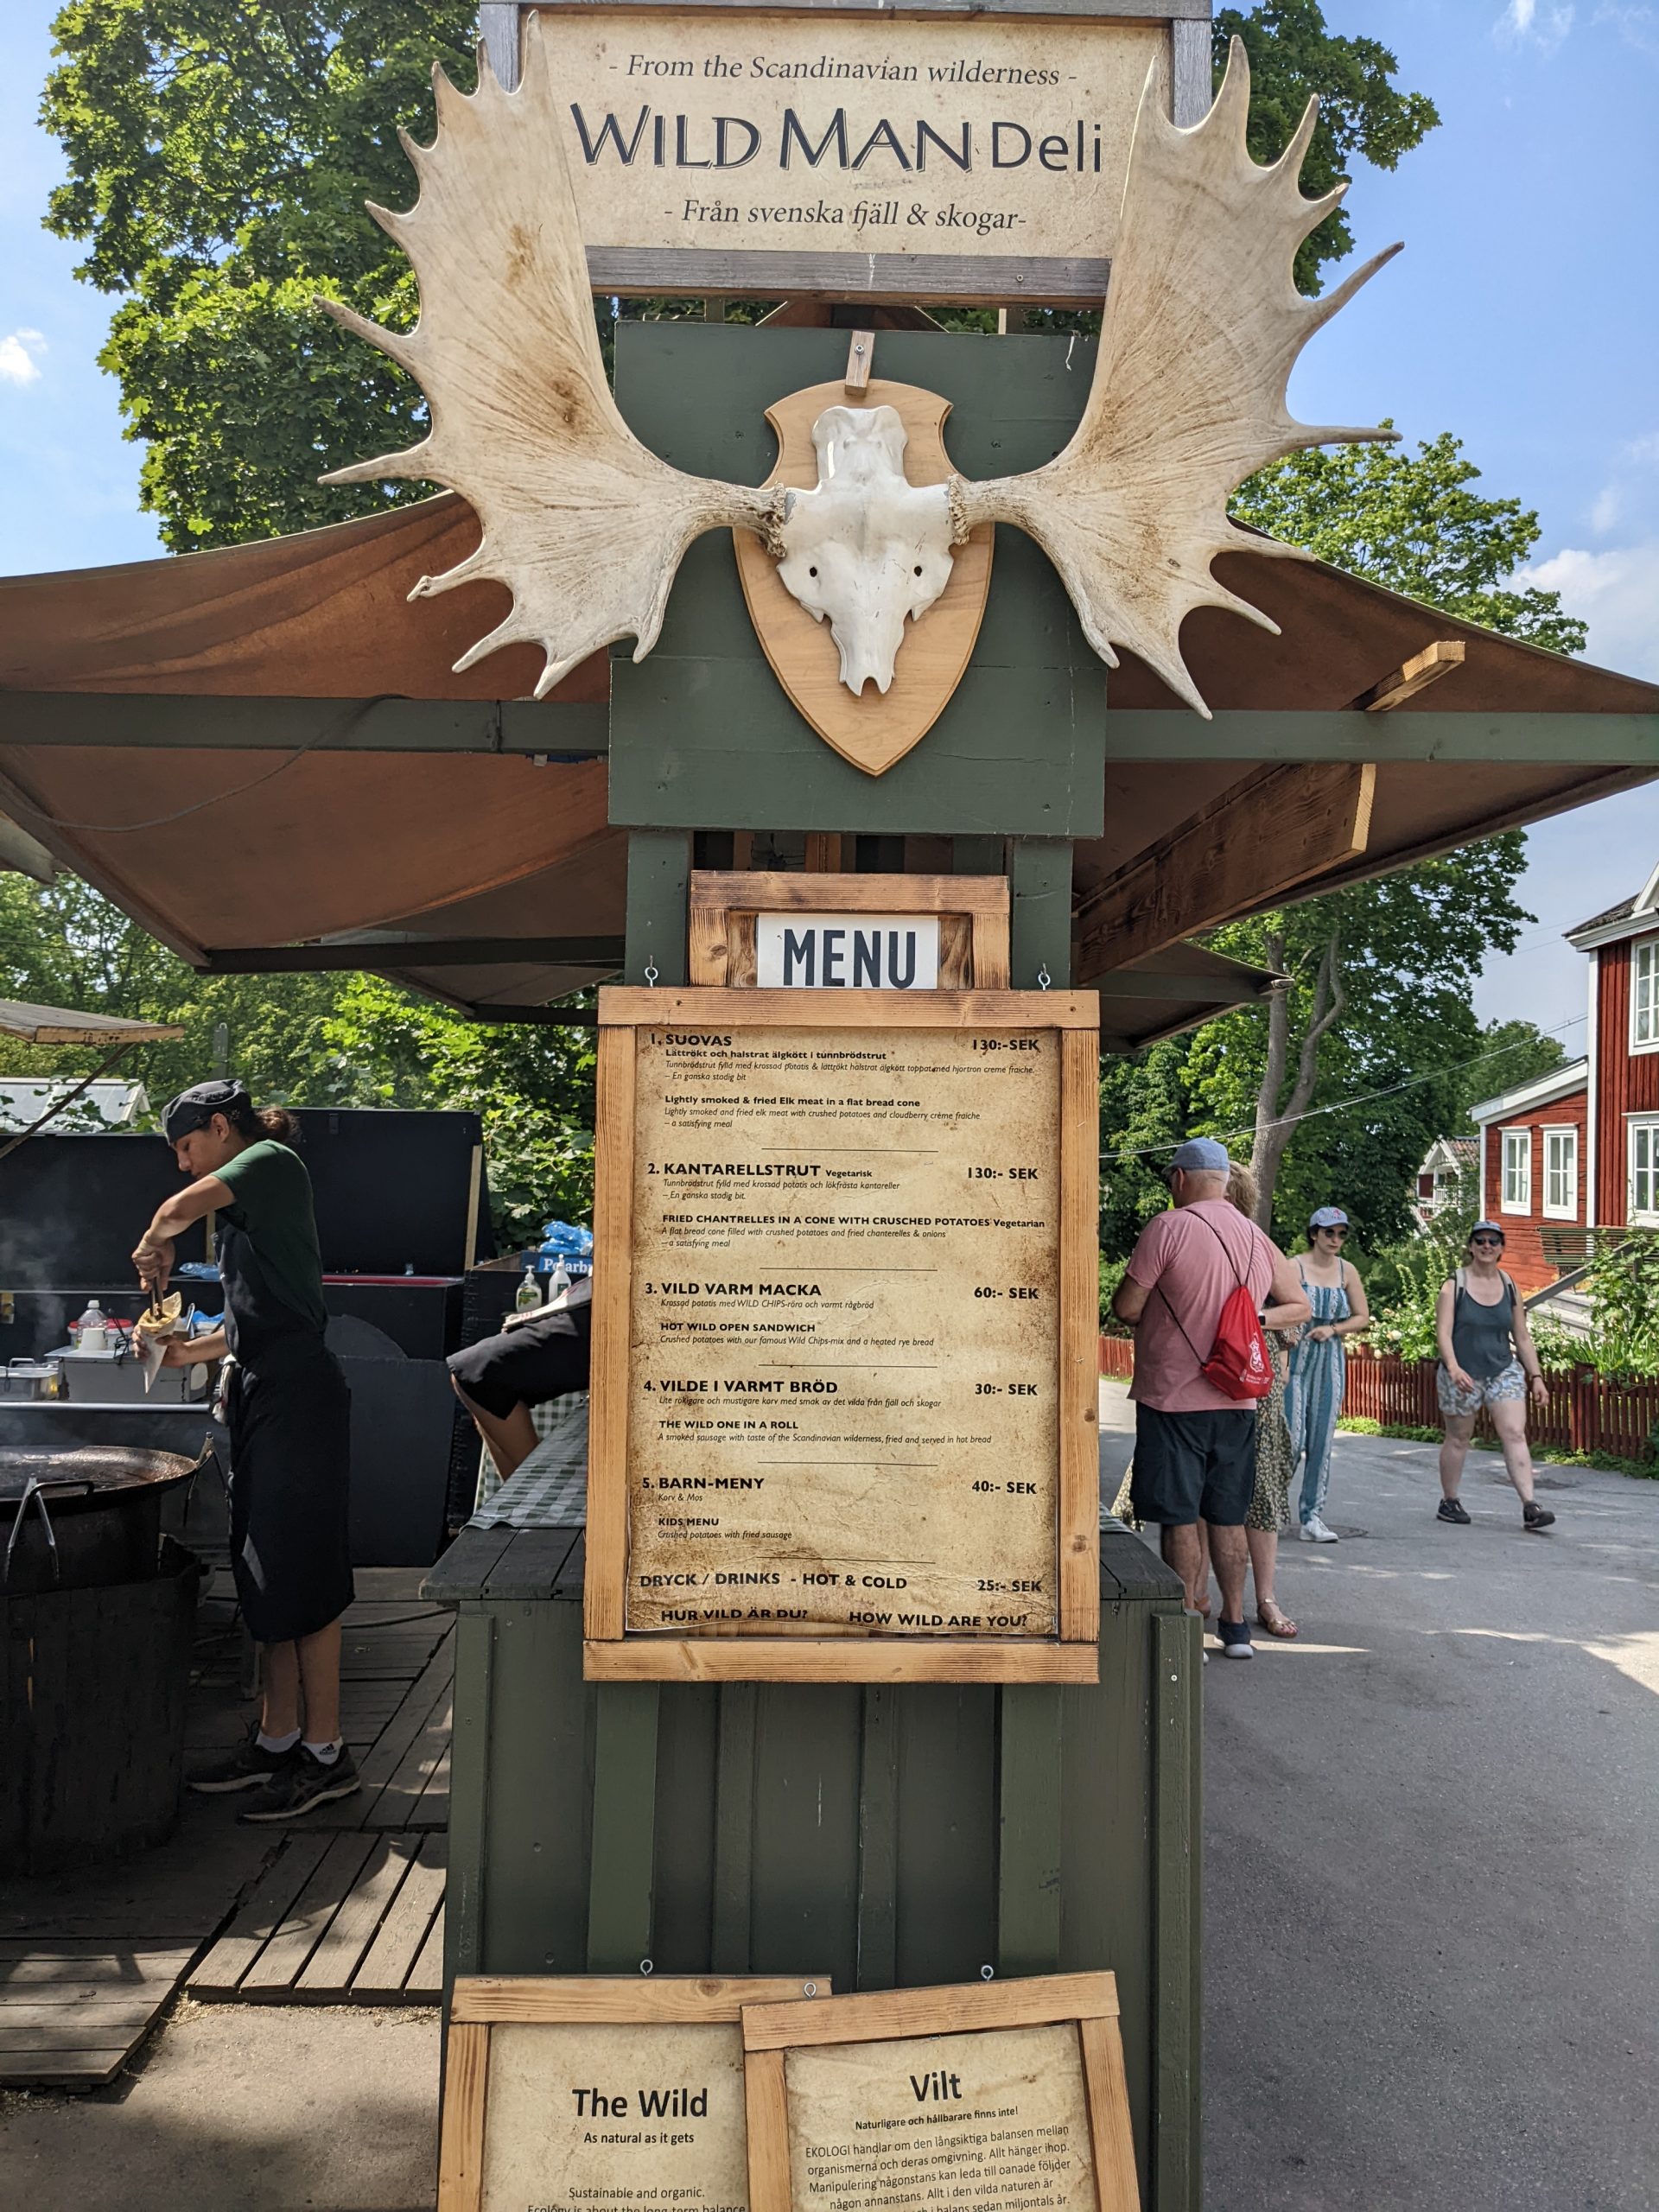 A stall named Wild Man Deli with a menu